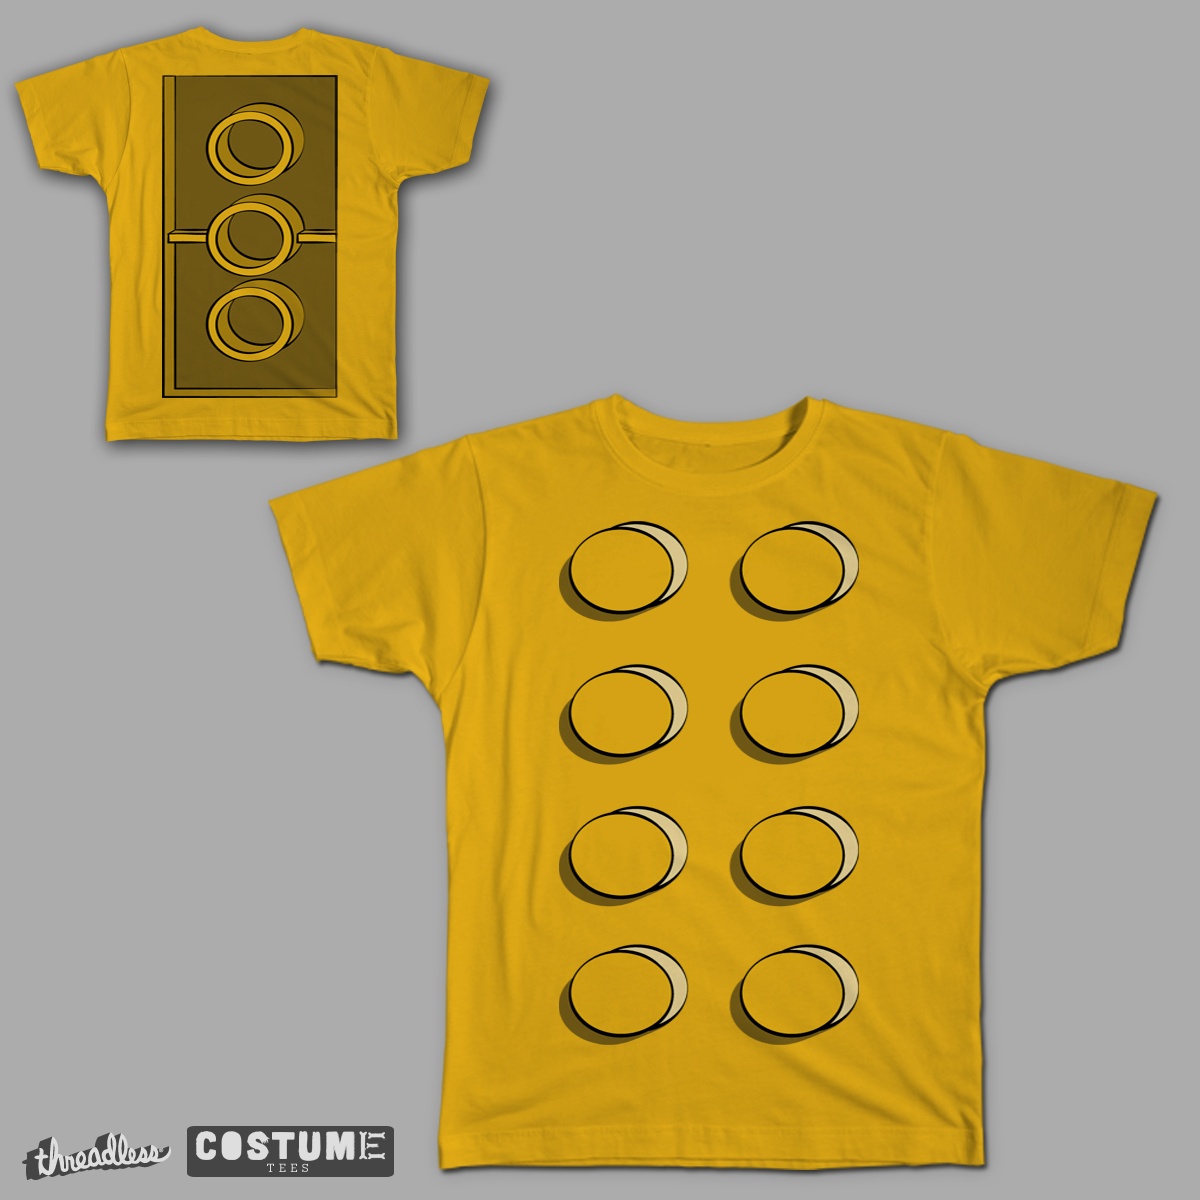 ABS of Plastic, a cool t-shirt design